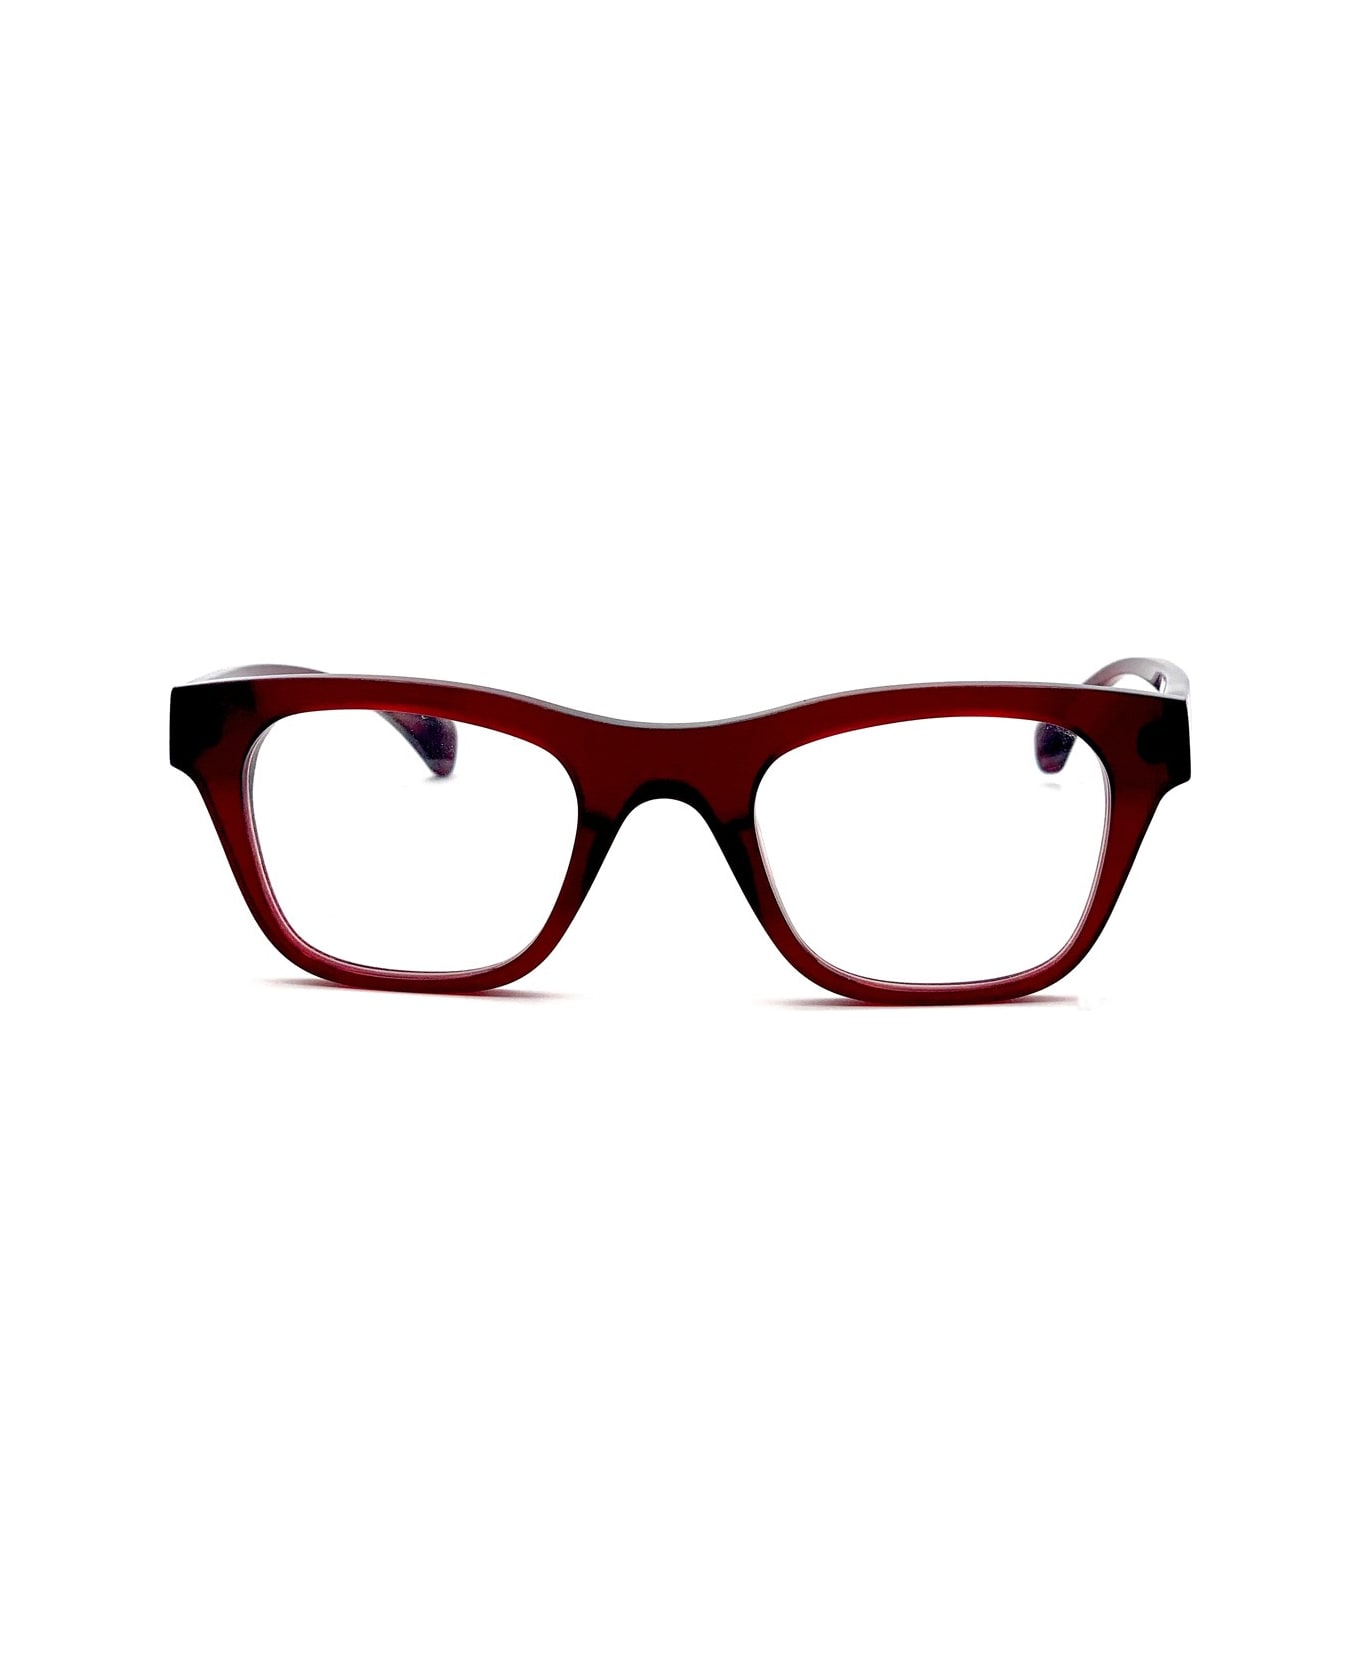 Jacques Durand Madere Xl 101 Glasses - Rosso アイウェア